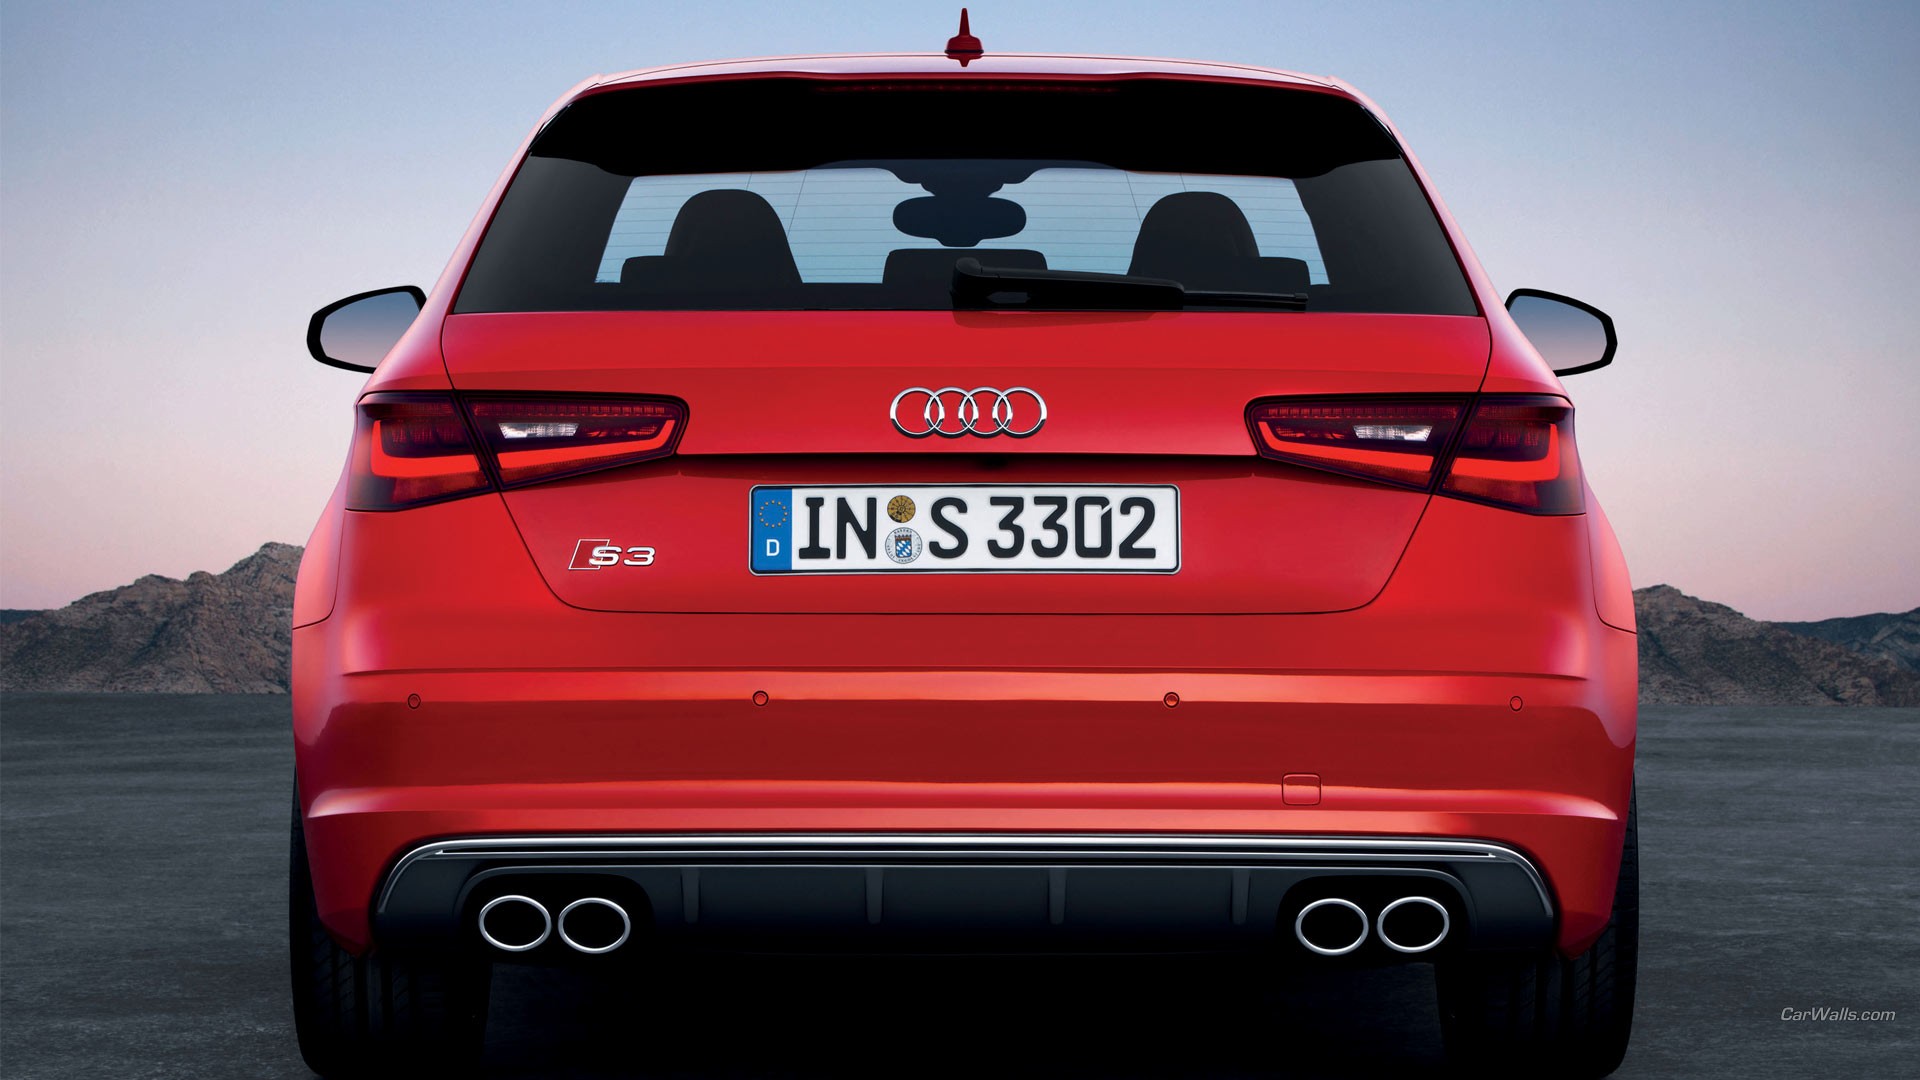 Audi S3, Red, Hatchbacks, Exhaust Pipes, German Cars, Tailights, Rear View, Diffusers Wallpaper